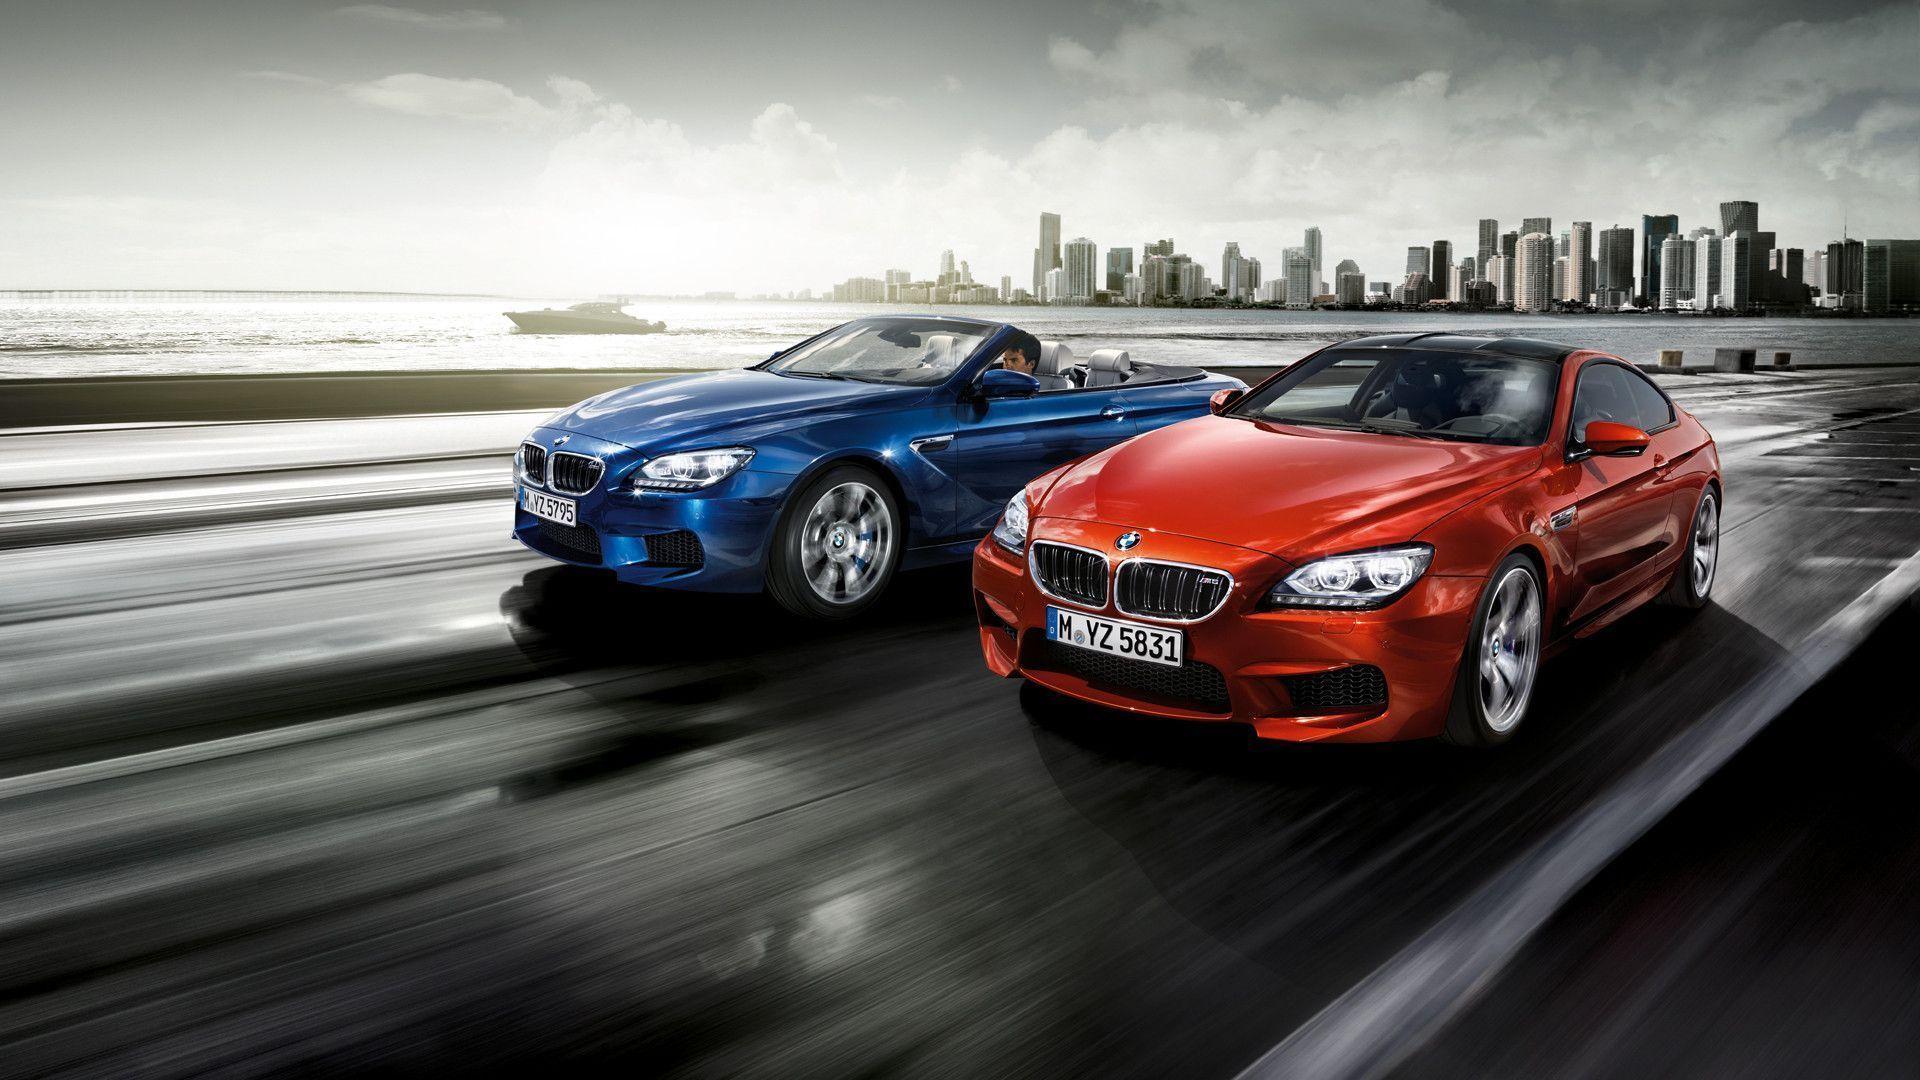 Wallpaper: New BMW M6 Coupe and Convertible